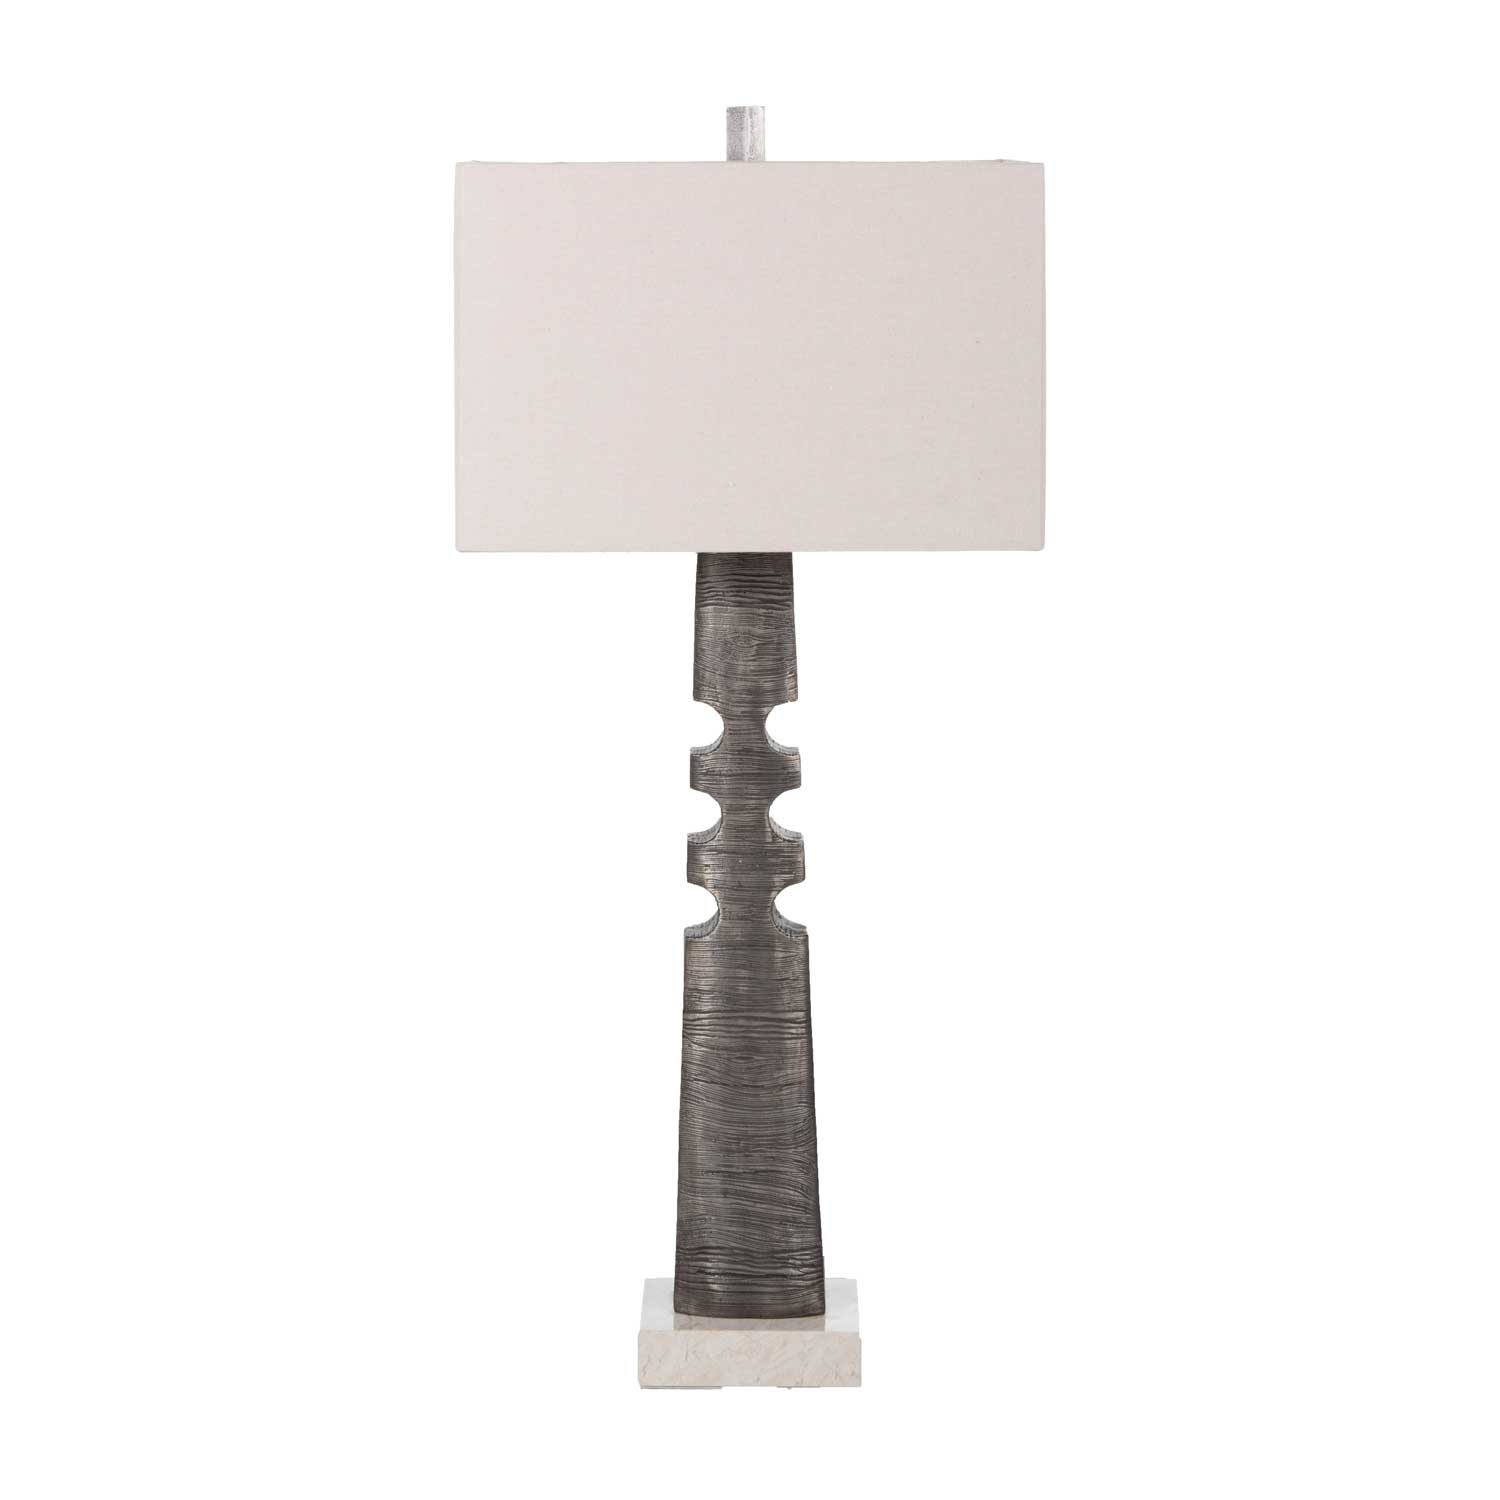 greer table lamp – cream product image